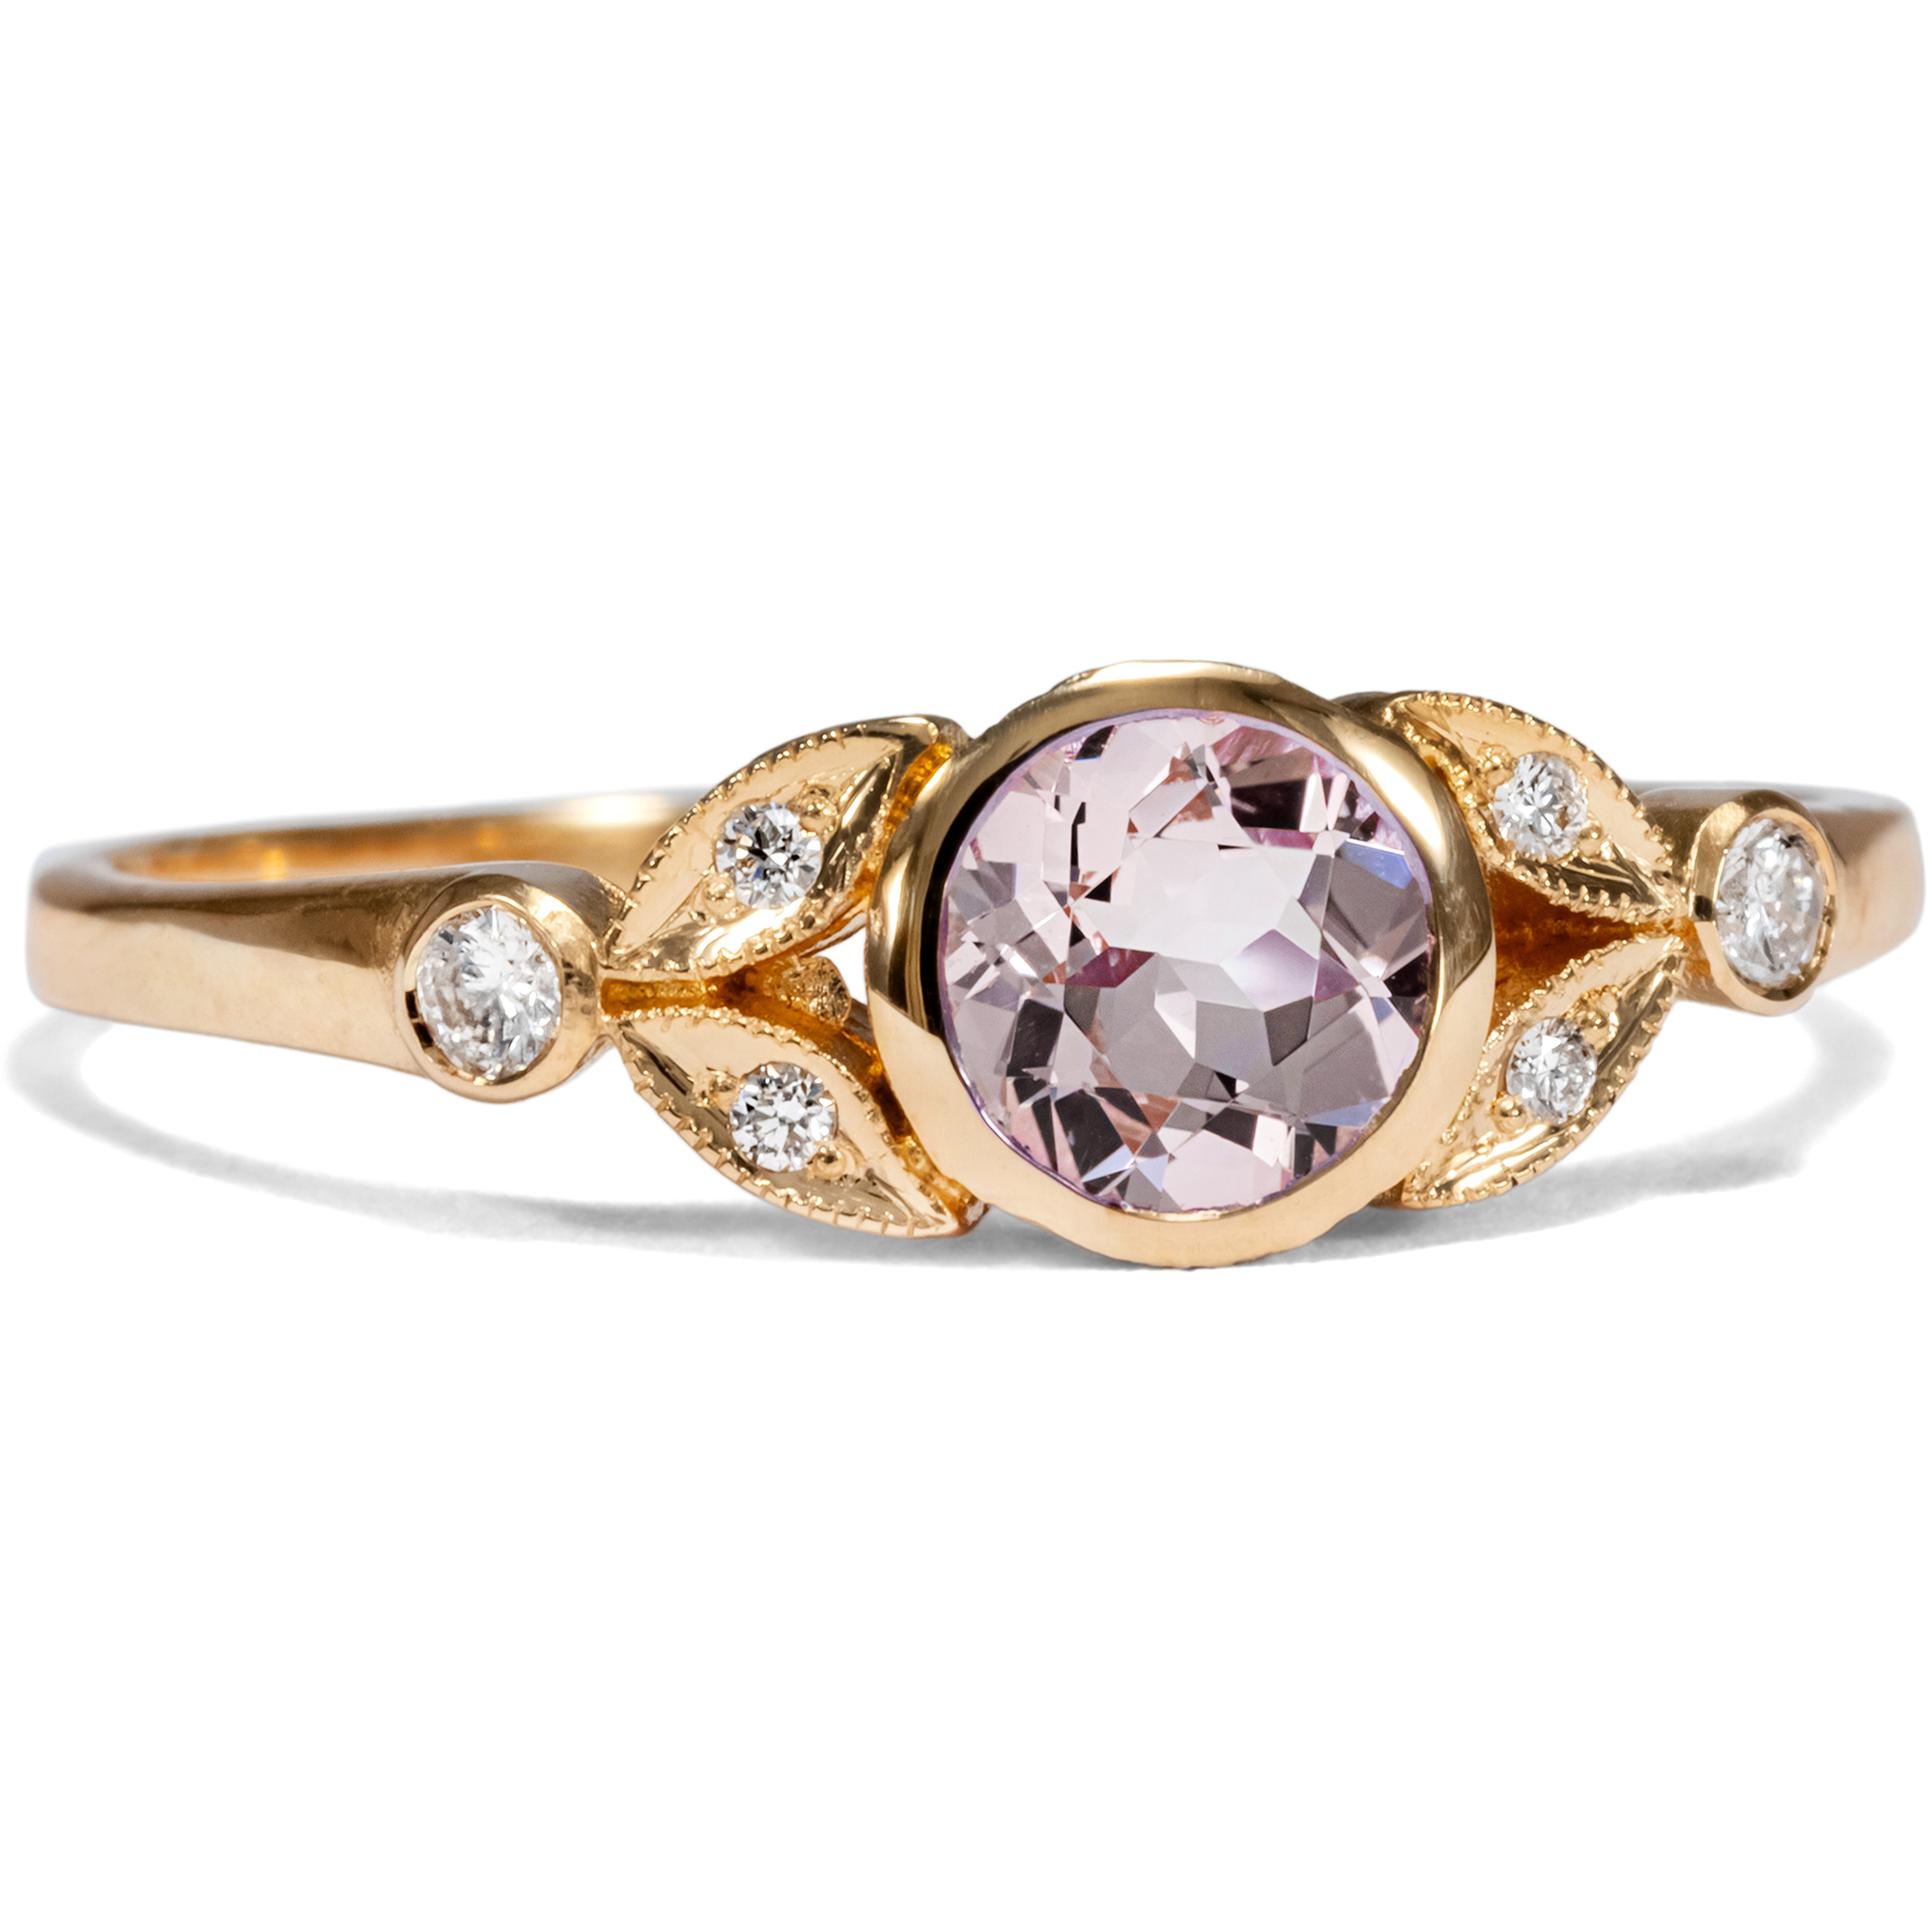 Unworn Ring with Morganite & Diamonds Set in Rose Gold, Made in Our Workshop